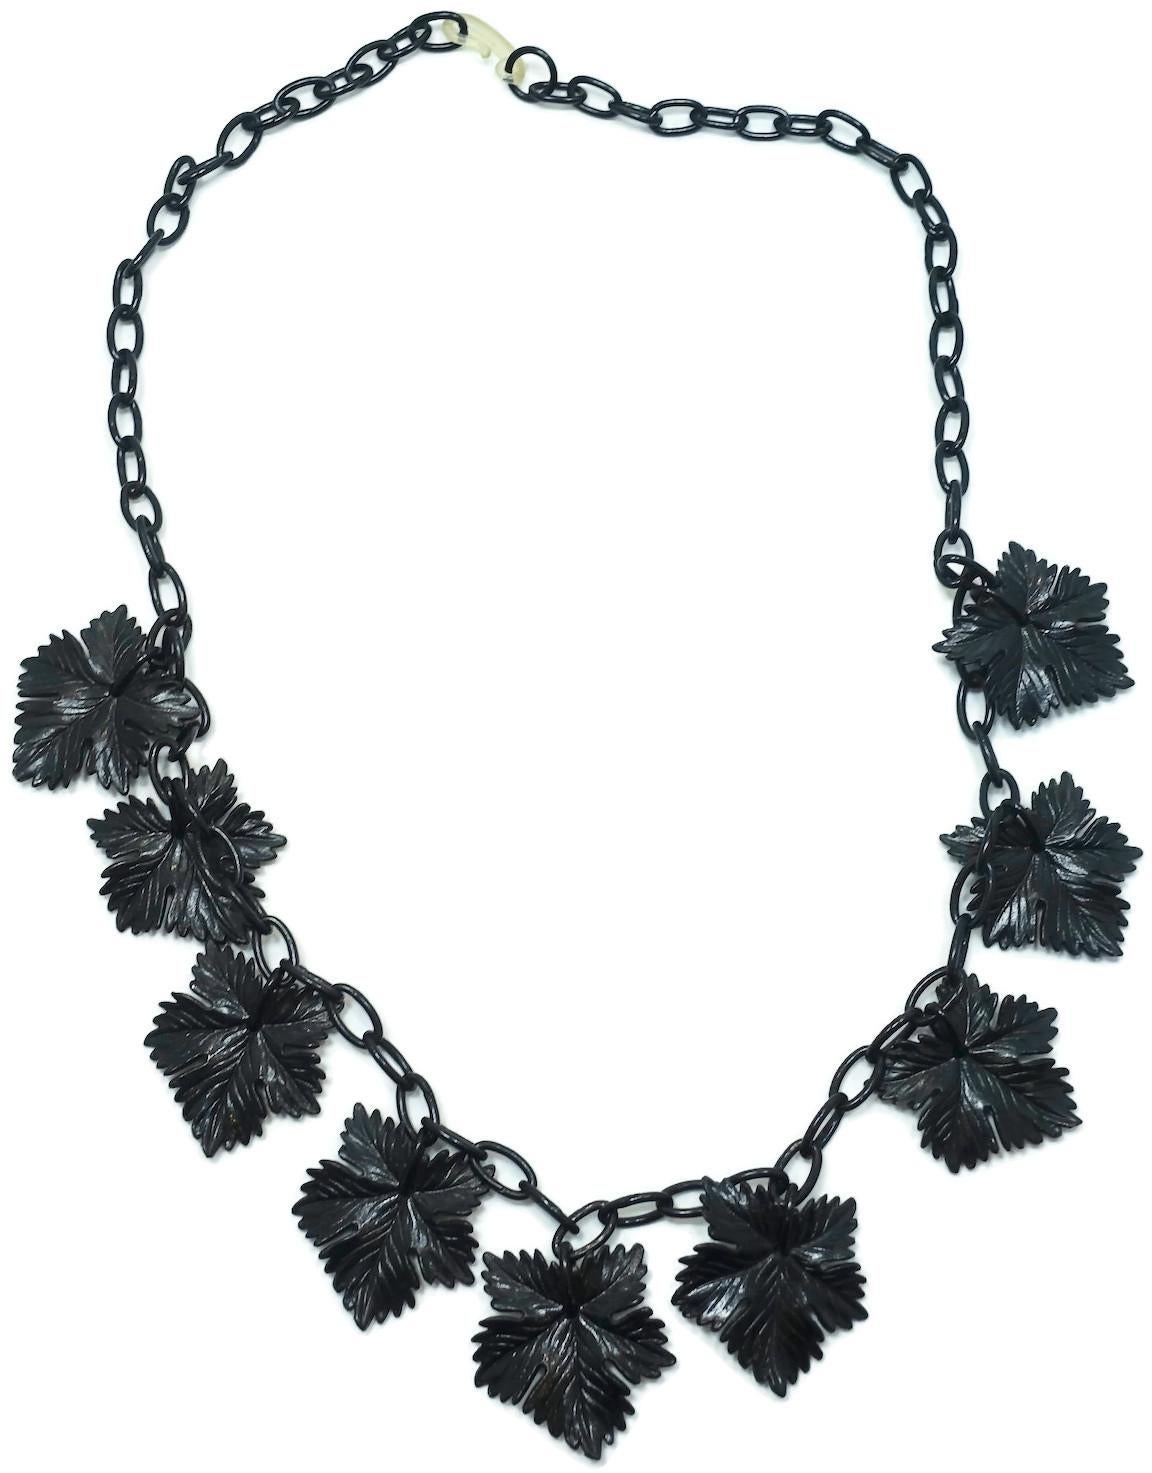 Vintage 1930s Black Celluloid Carved Leaves Drop Necklace In Good Condition For Sale In New York, NY